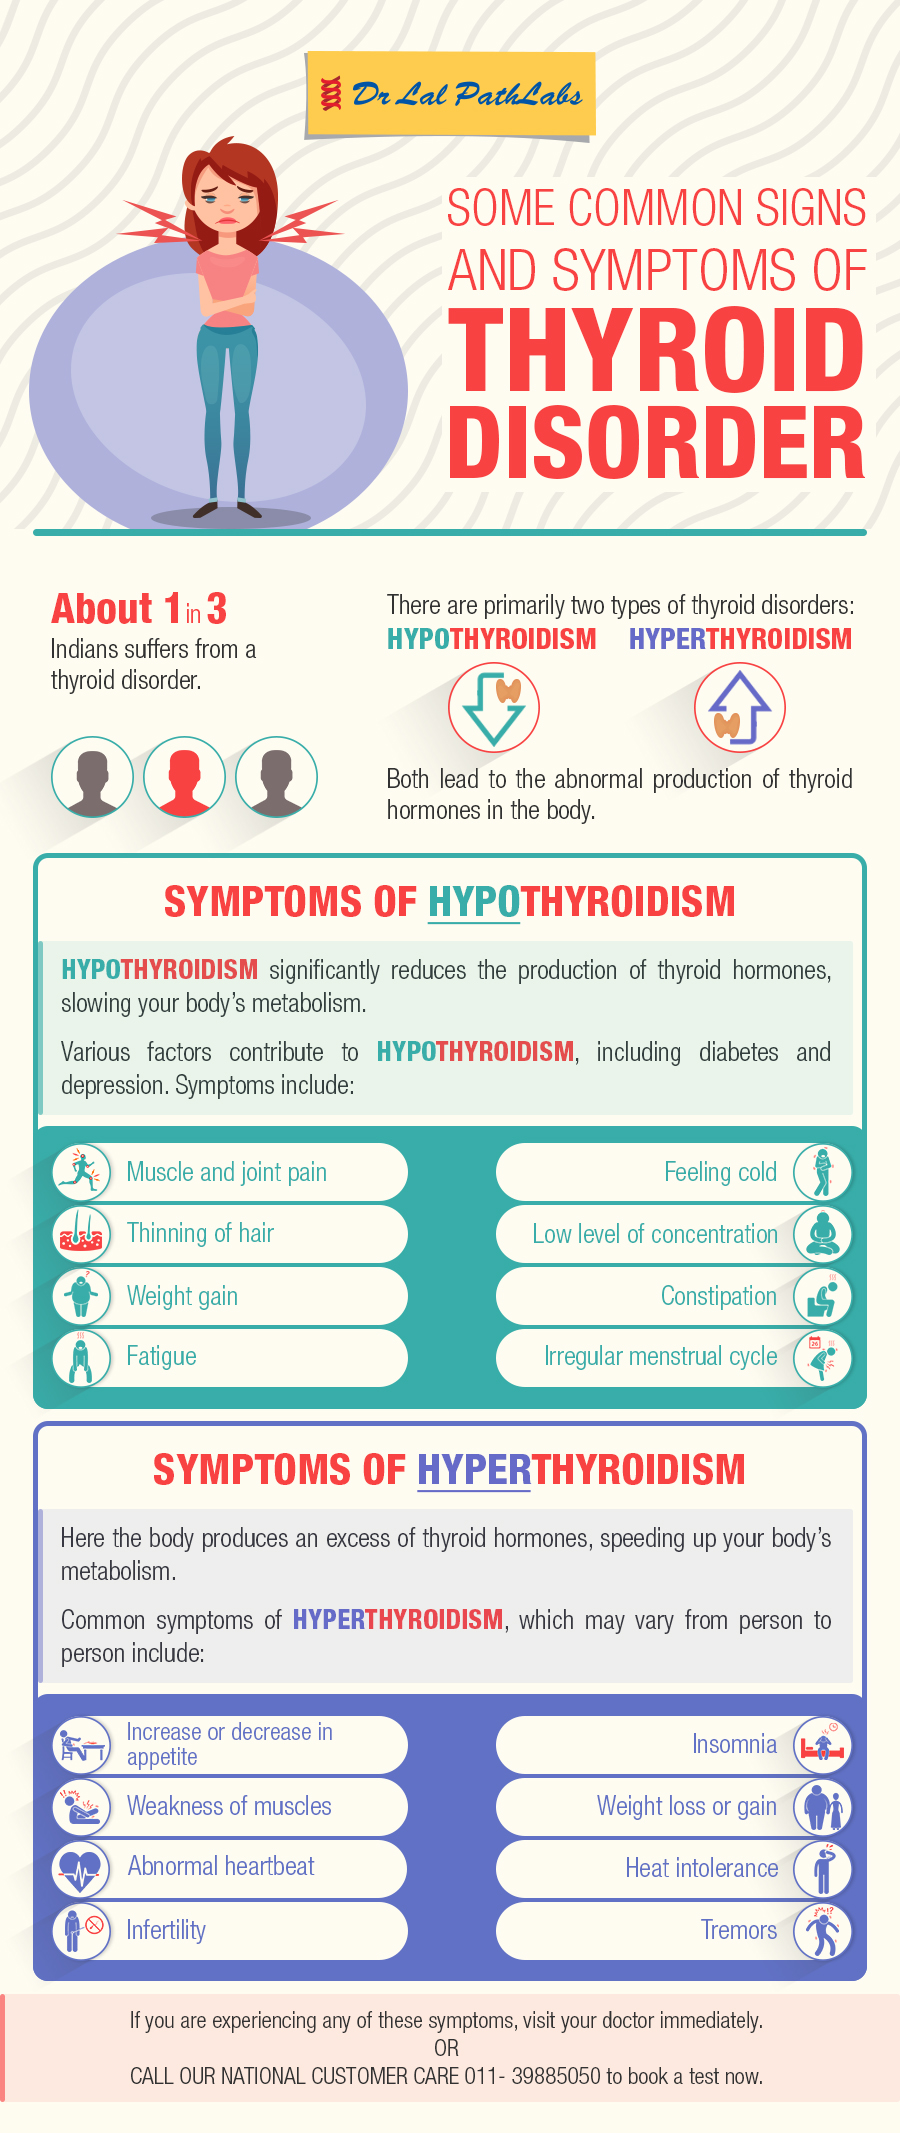 Signs And Symptoms of Thyroid Disorder